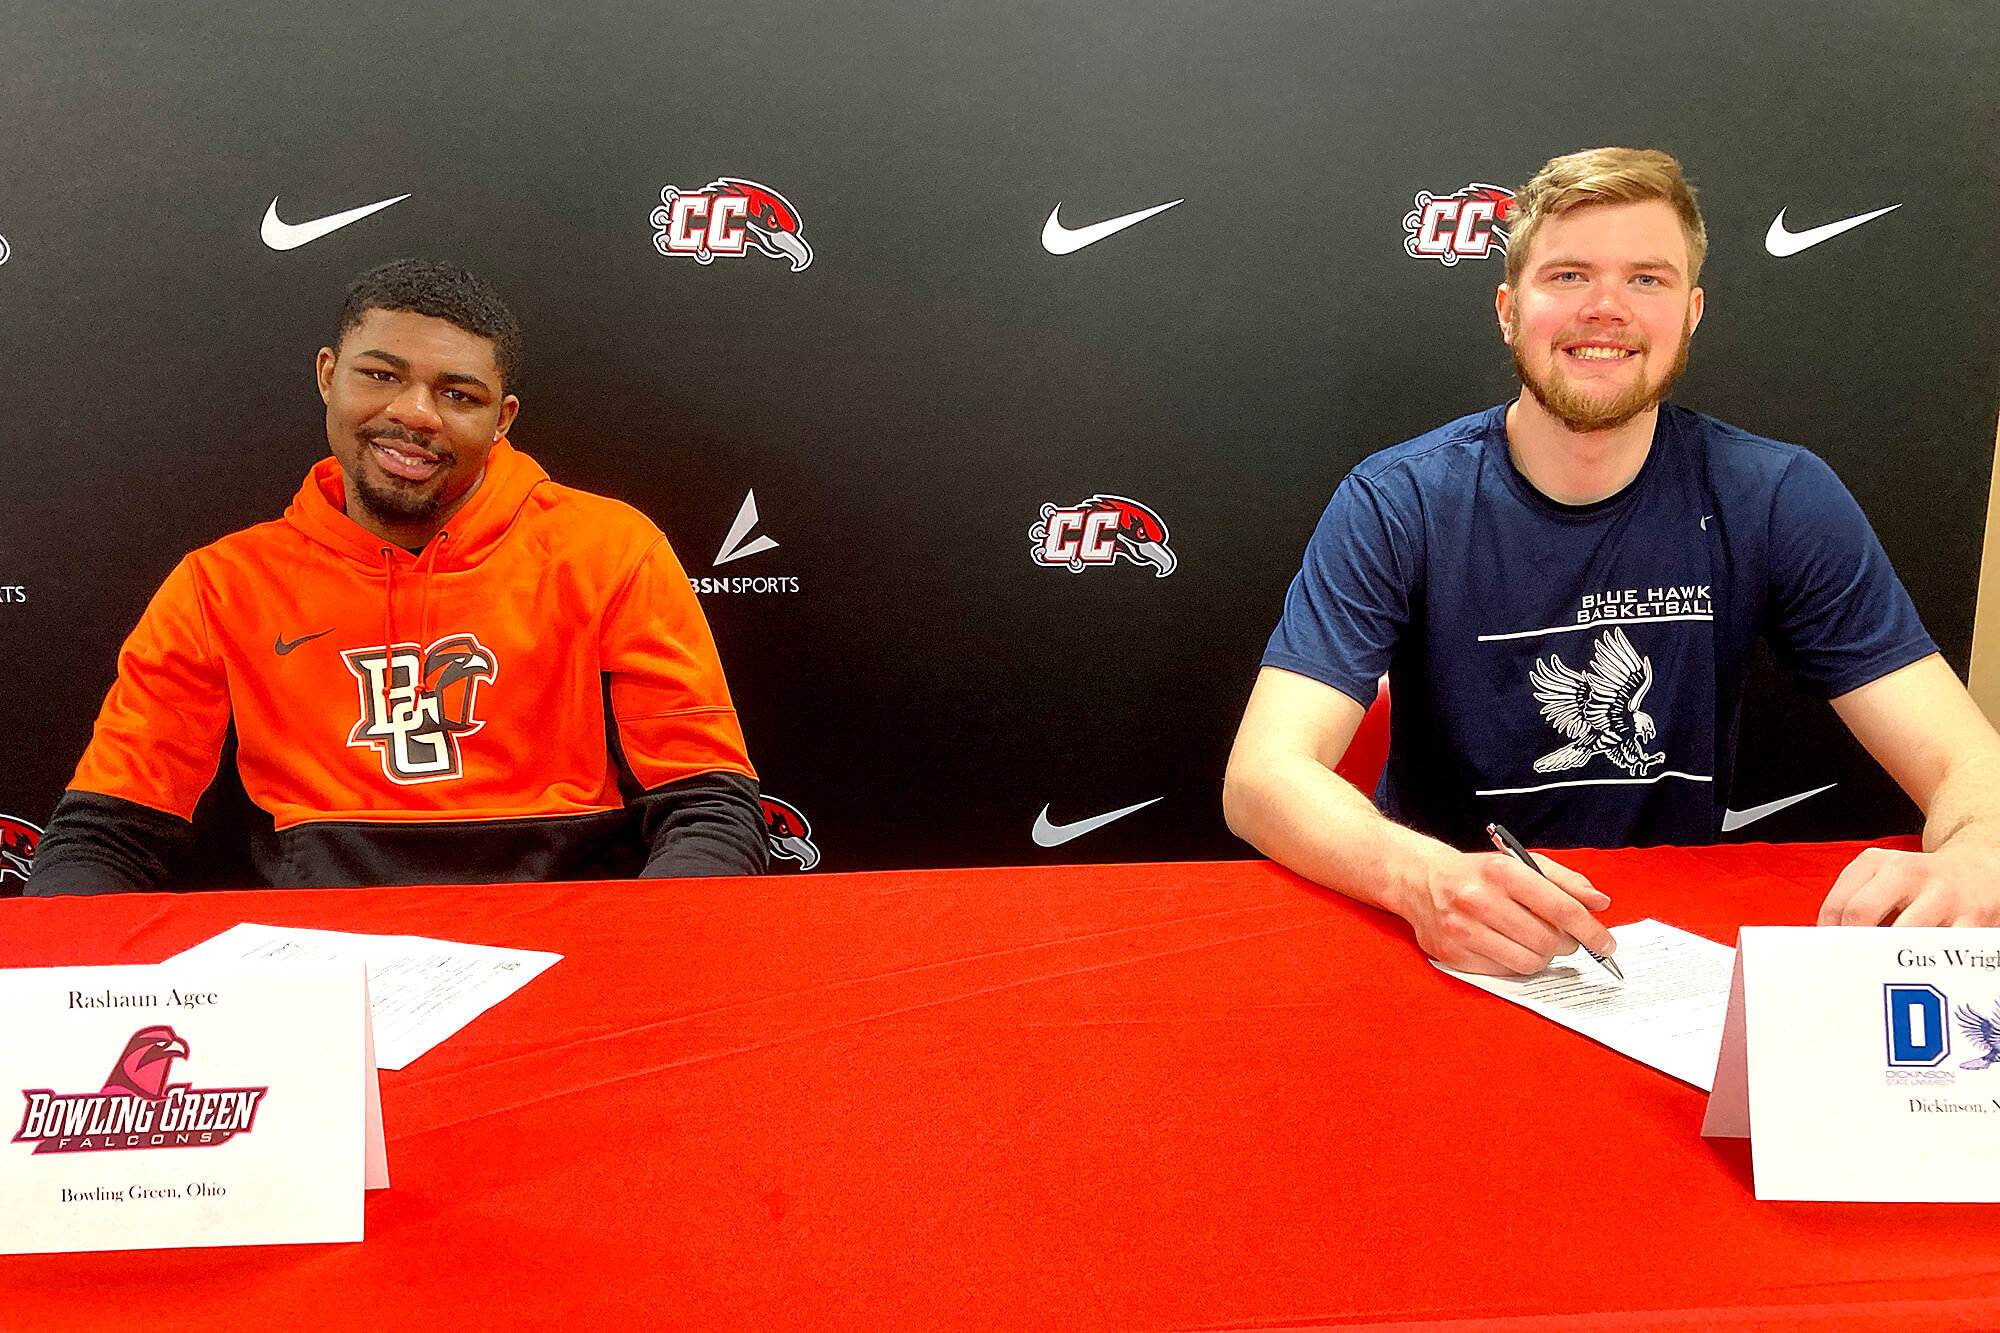 Casper College basketball players Rashaun Agee and Gus Wright have signed their letters of intent to play basketball at a four-year school.